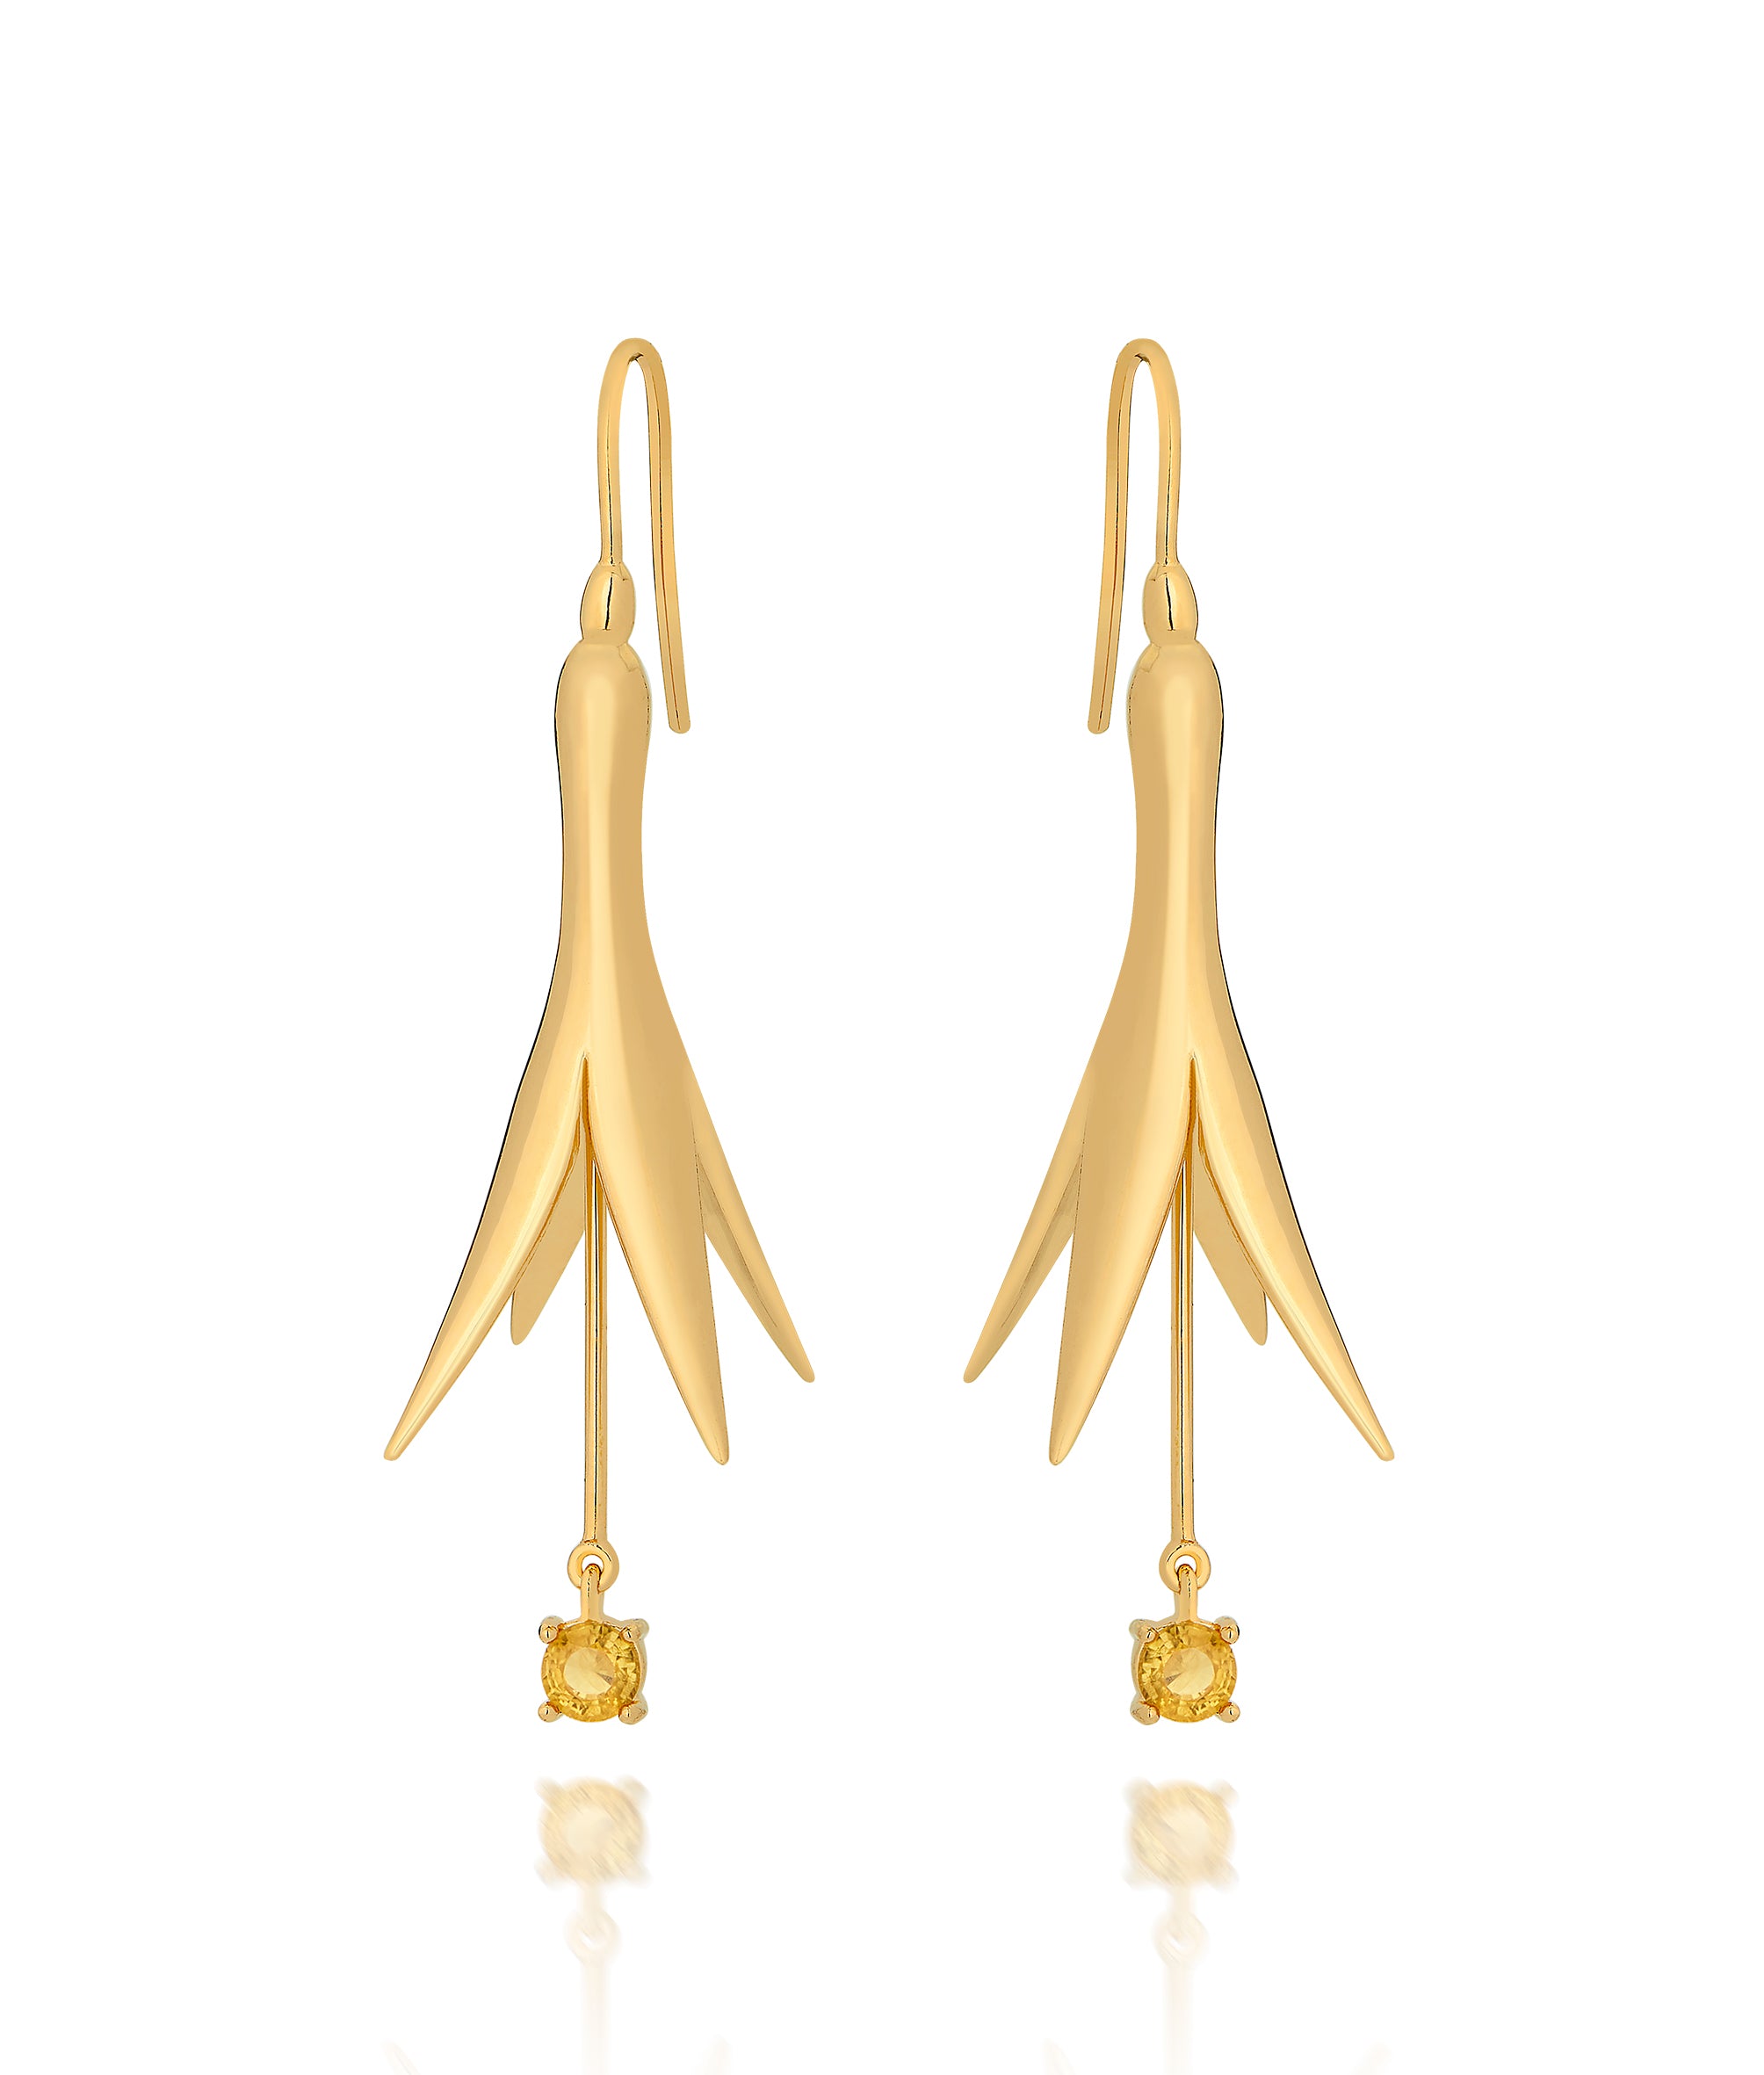 SMALL PRINCESS EARRING IN 18K YELLOW GOLD PLATED SILVER WITH SAPPHIRE